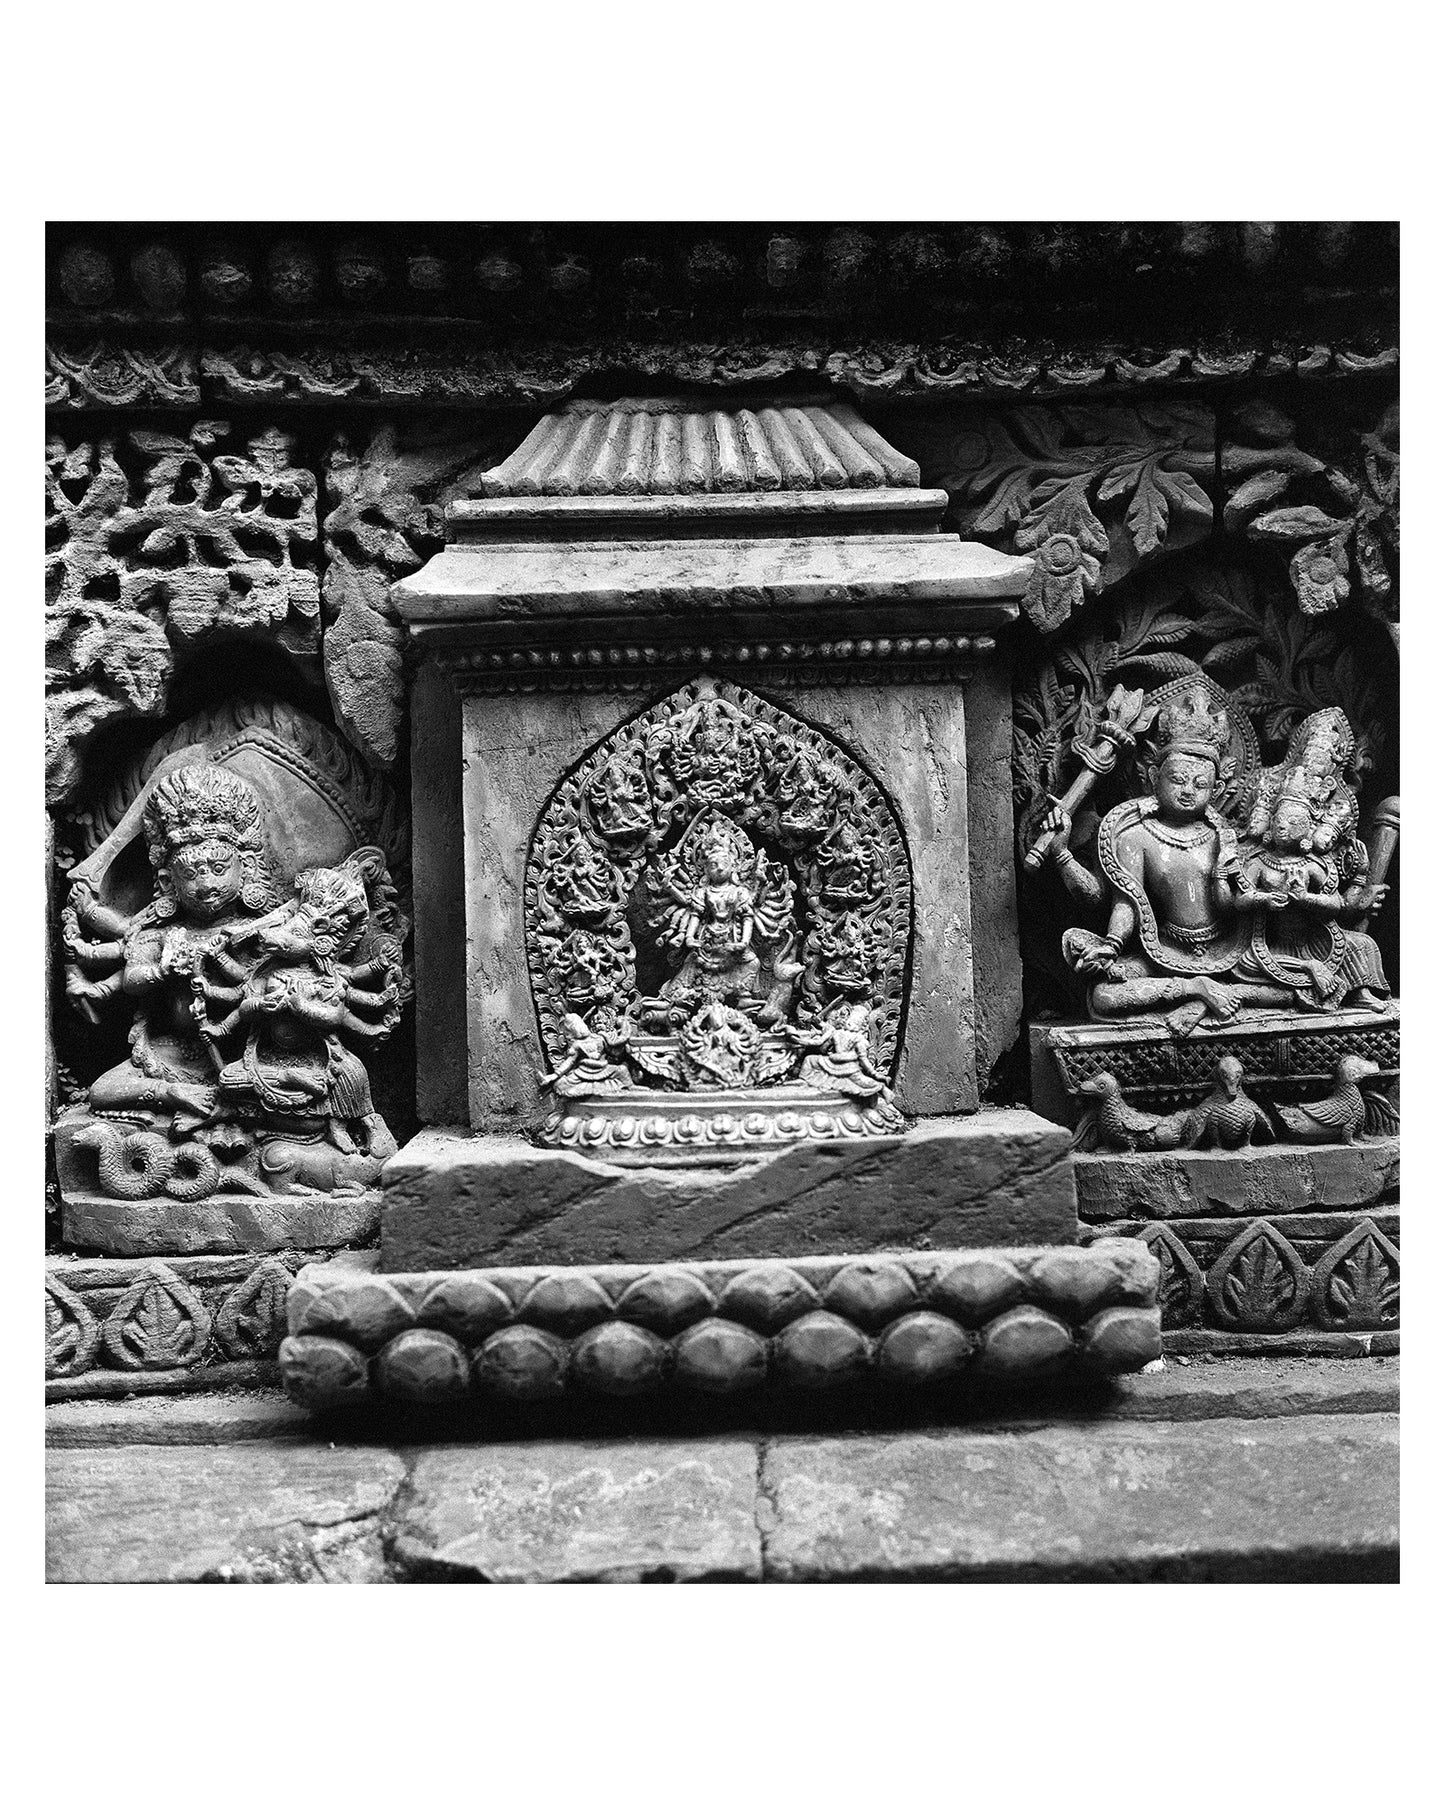 Temple Statues Nepal- The Supreme Personality of Godhead said: Those who fix their minds on My personal form and are always engaged in worshiping Me with great and transcendental faith are considered by Me to be most perfect.